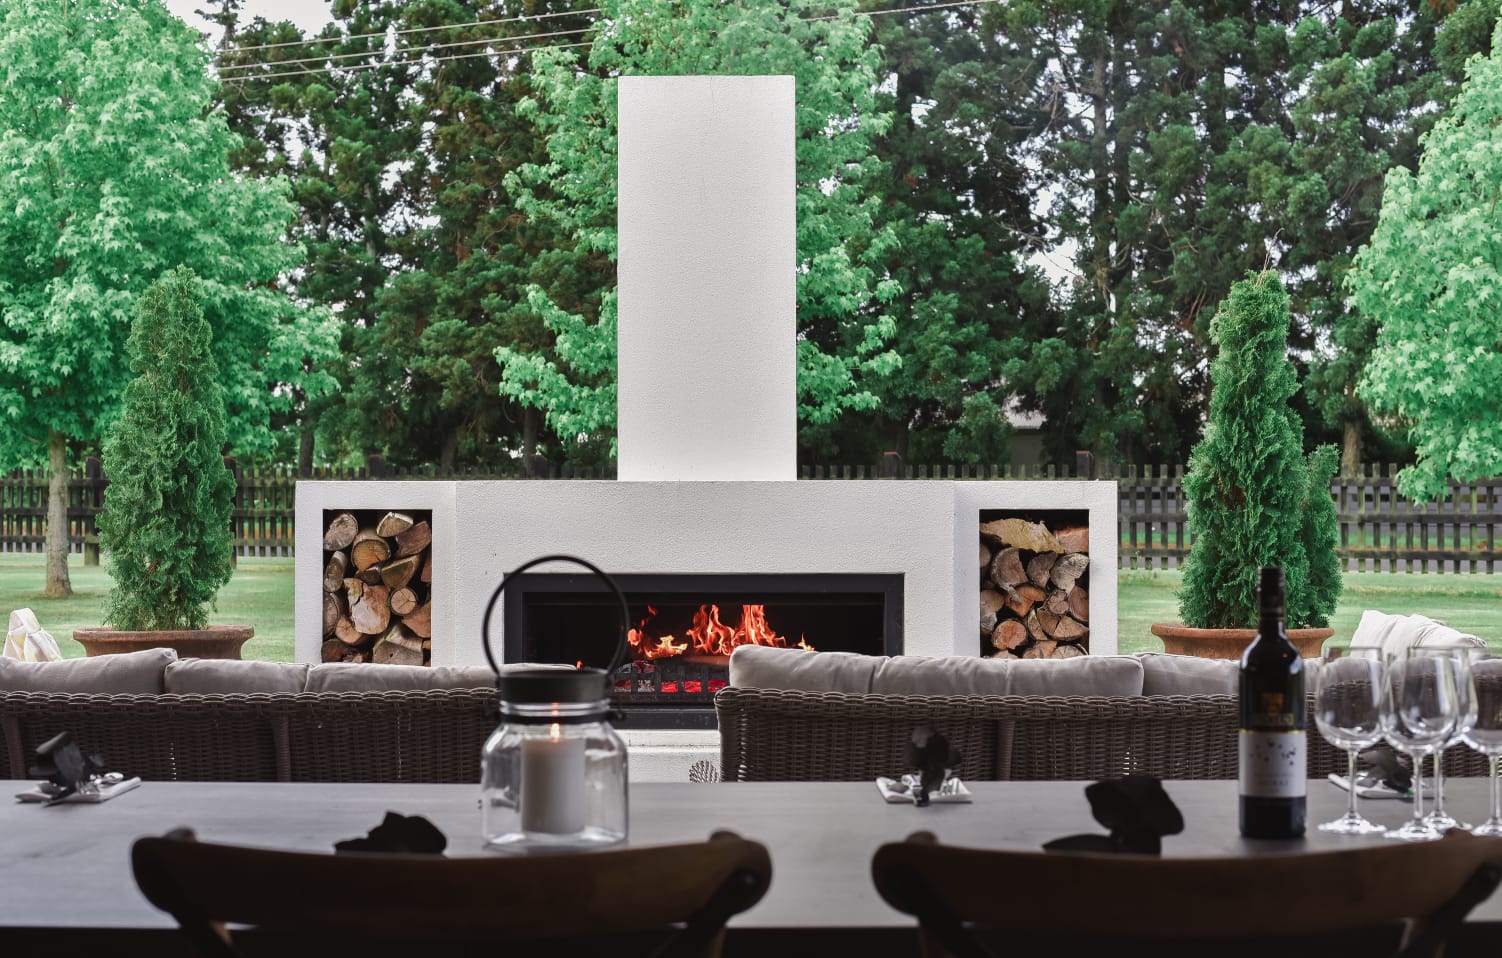 Wood or gas outdoor fireplace - which is best